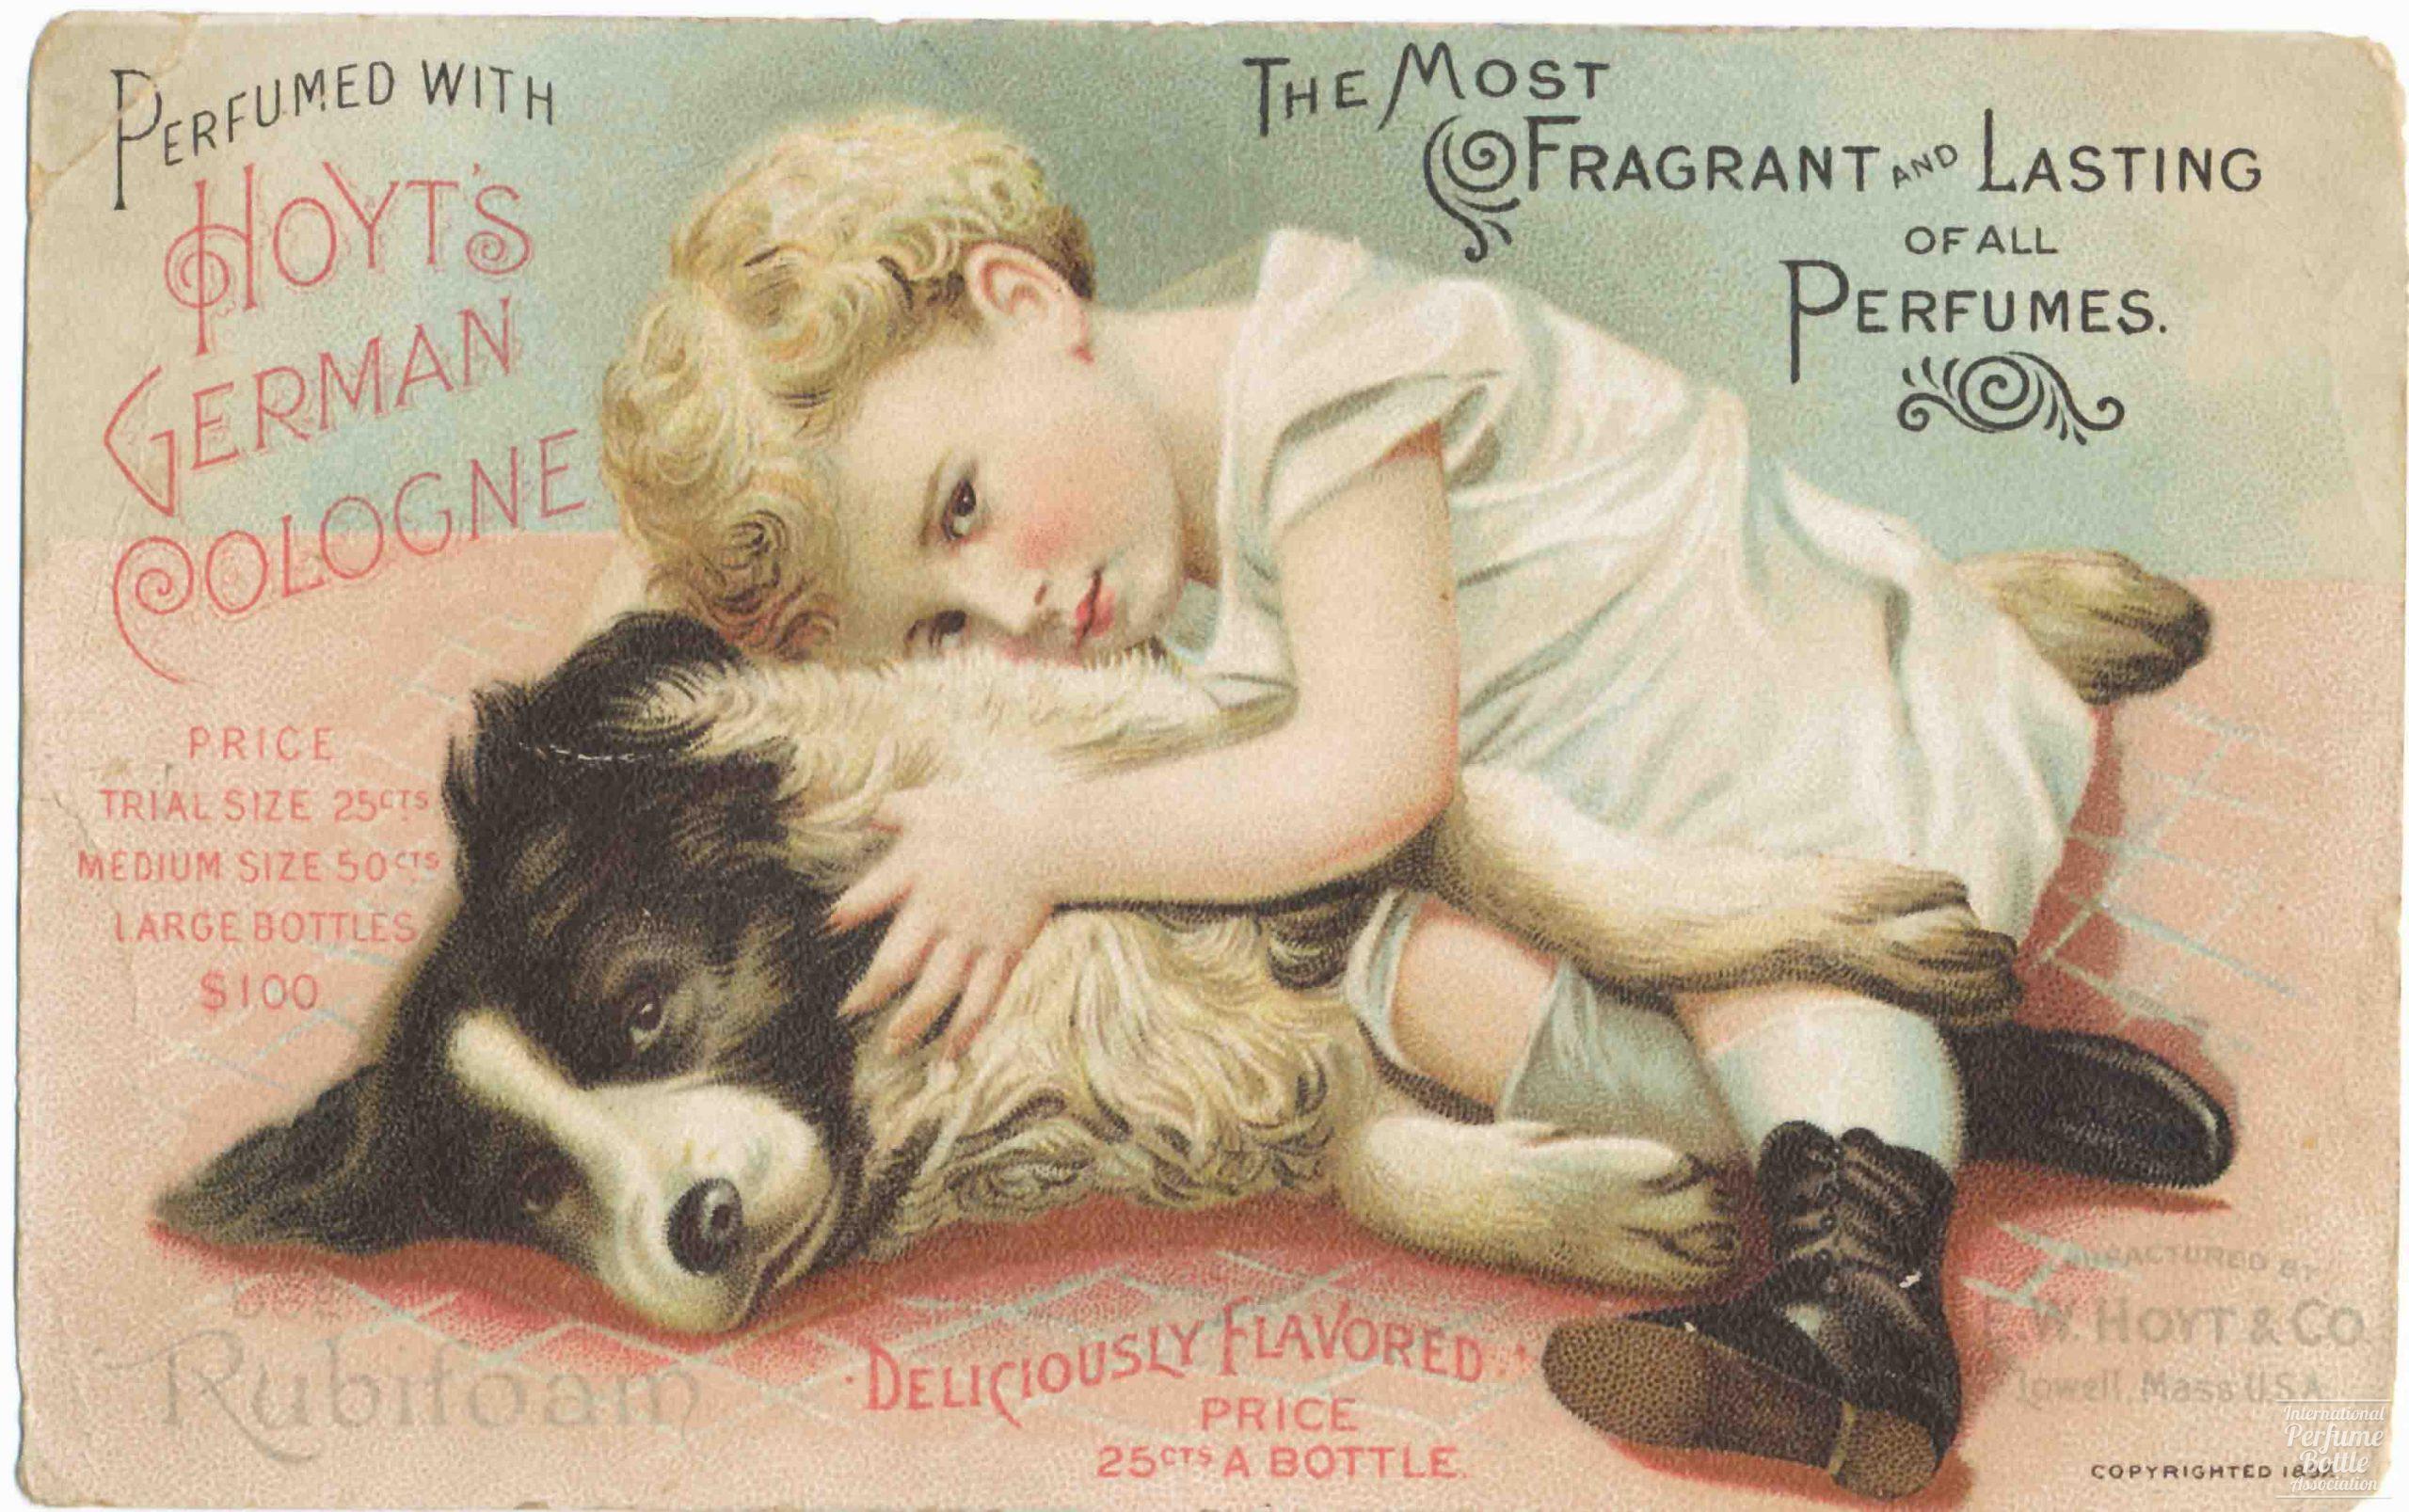 “Hoyt’s German Cologne” Scent Card by E. W. Hoyt & Co. – 1892